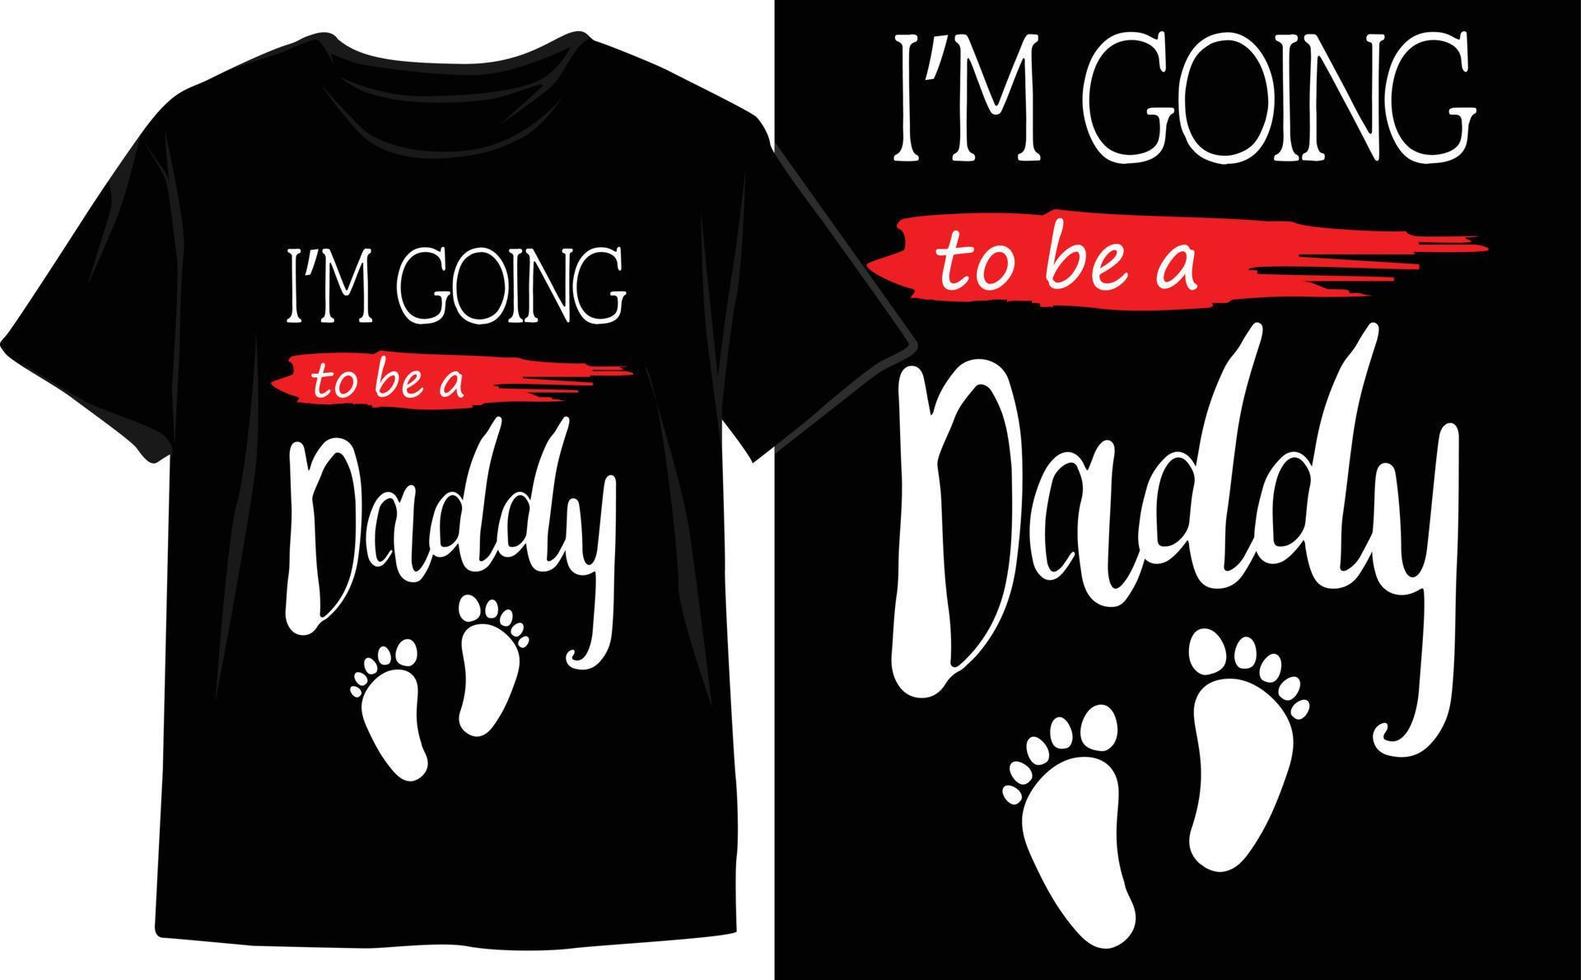 Unique Father's Day T-Shirt Design Vector Graphics to Show Your Appreciation in Style. Dad Vector. Funny Dad t shirt.